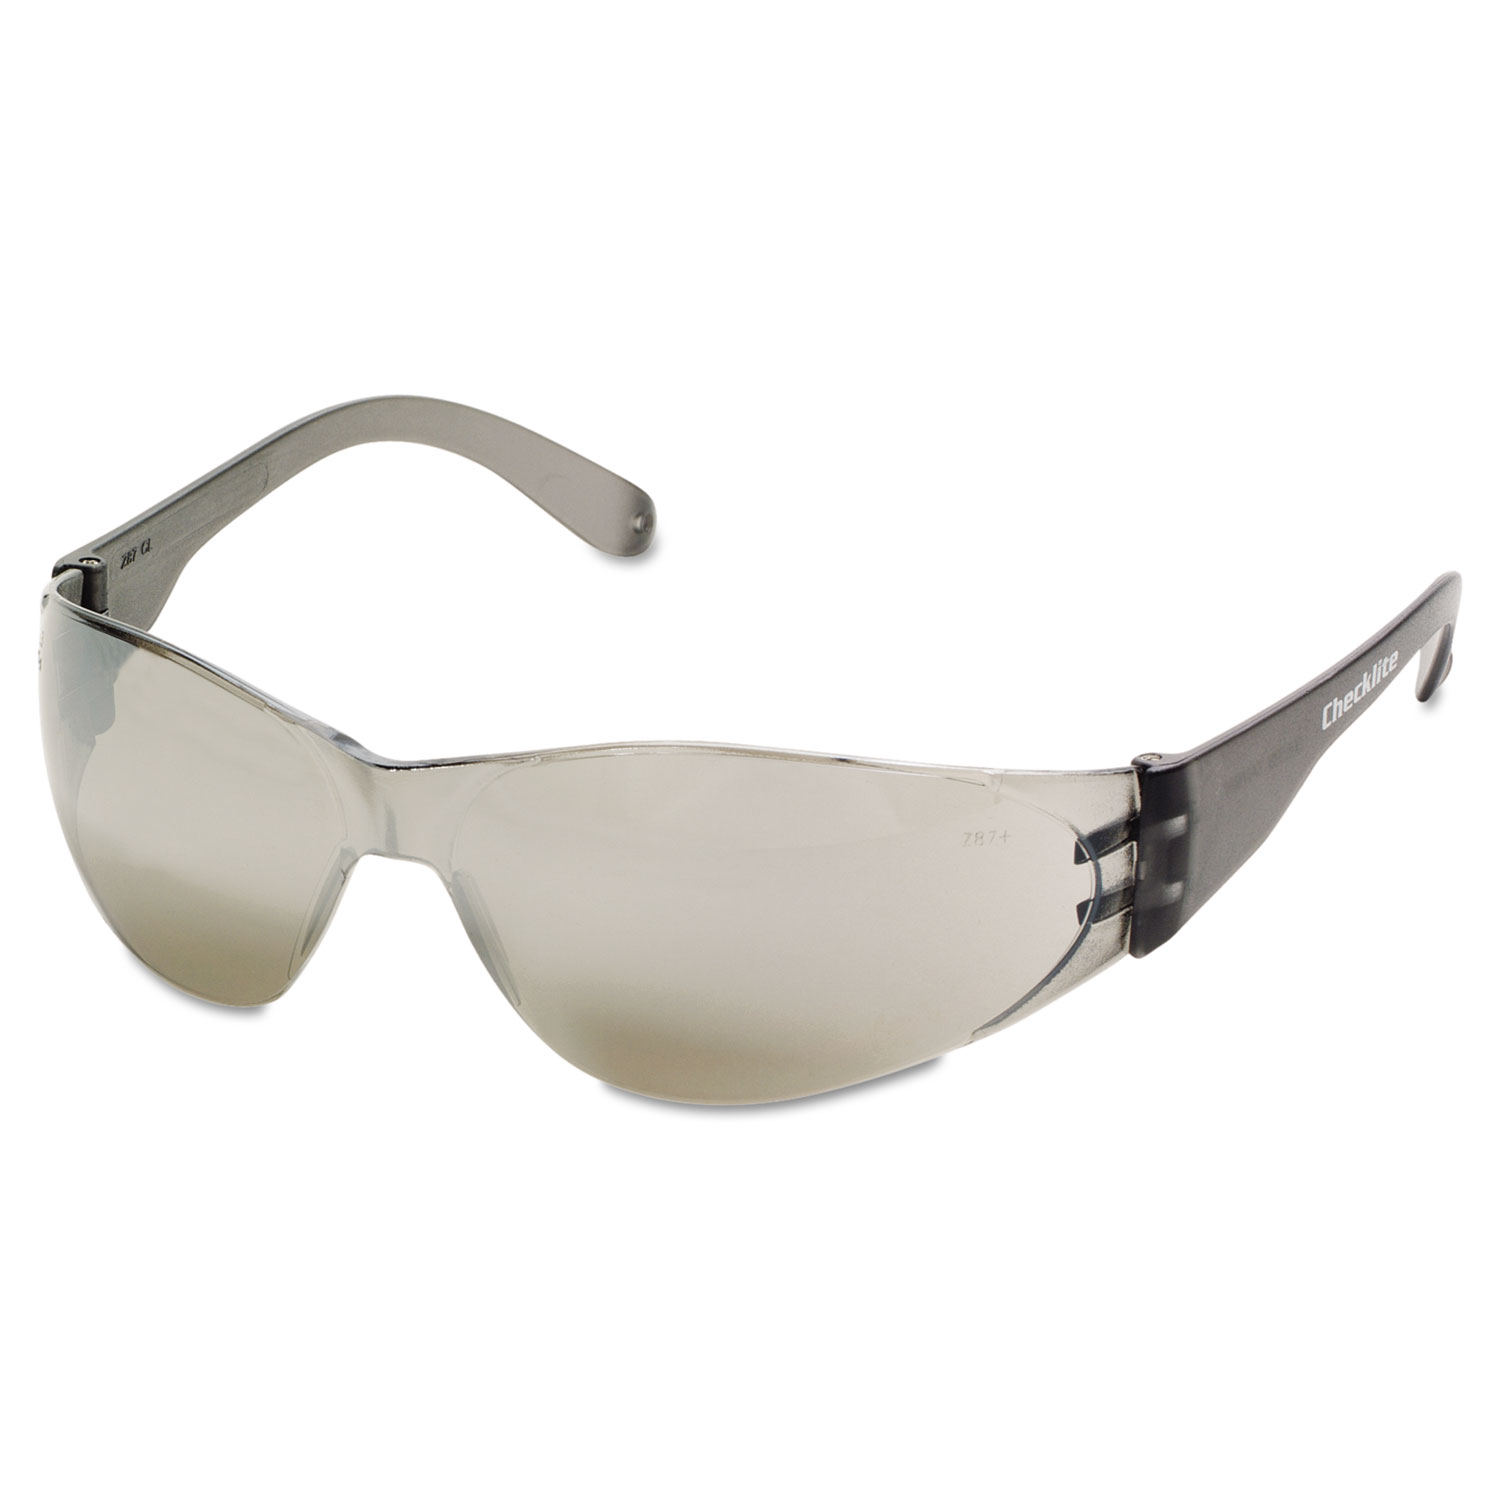  MCR Safety CL117 Checklite Safety Glasses, Silver Mirror Lens (CRWCL117) 